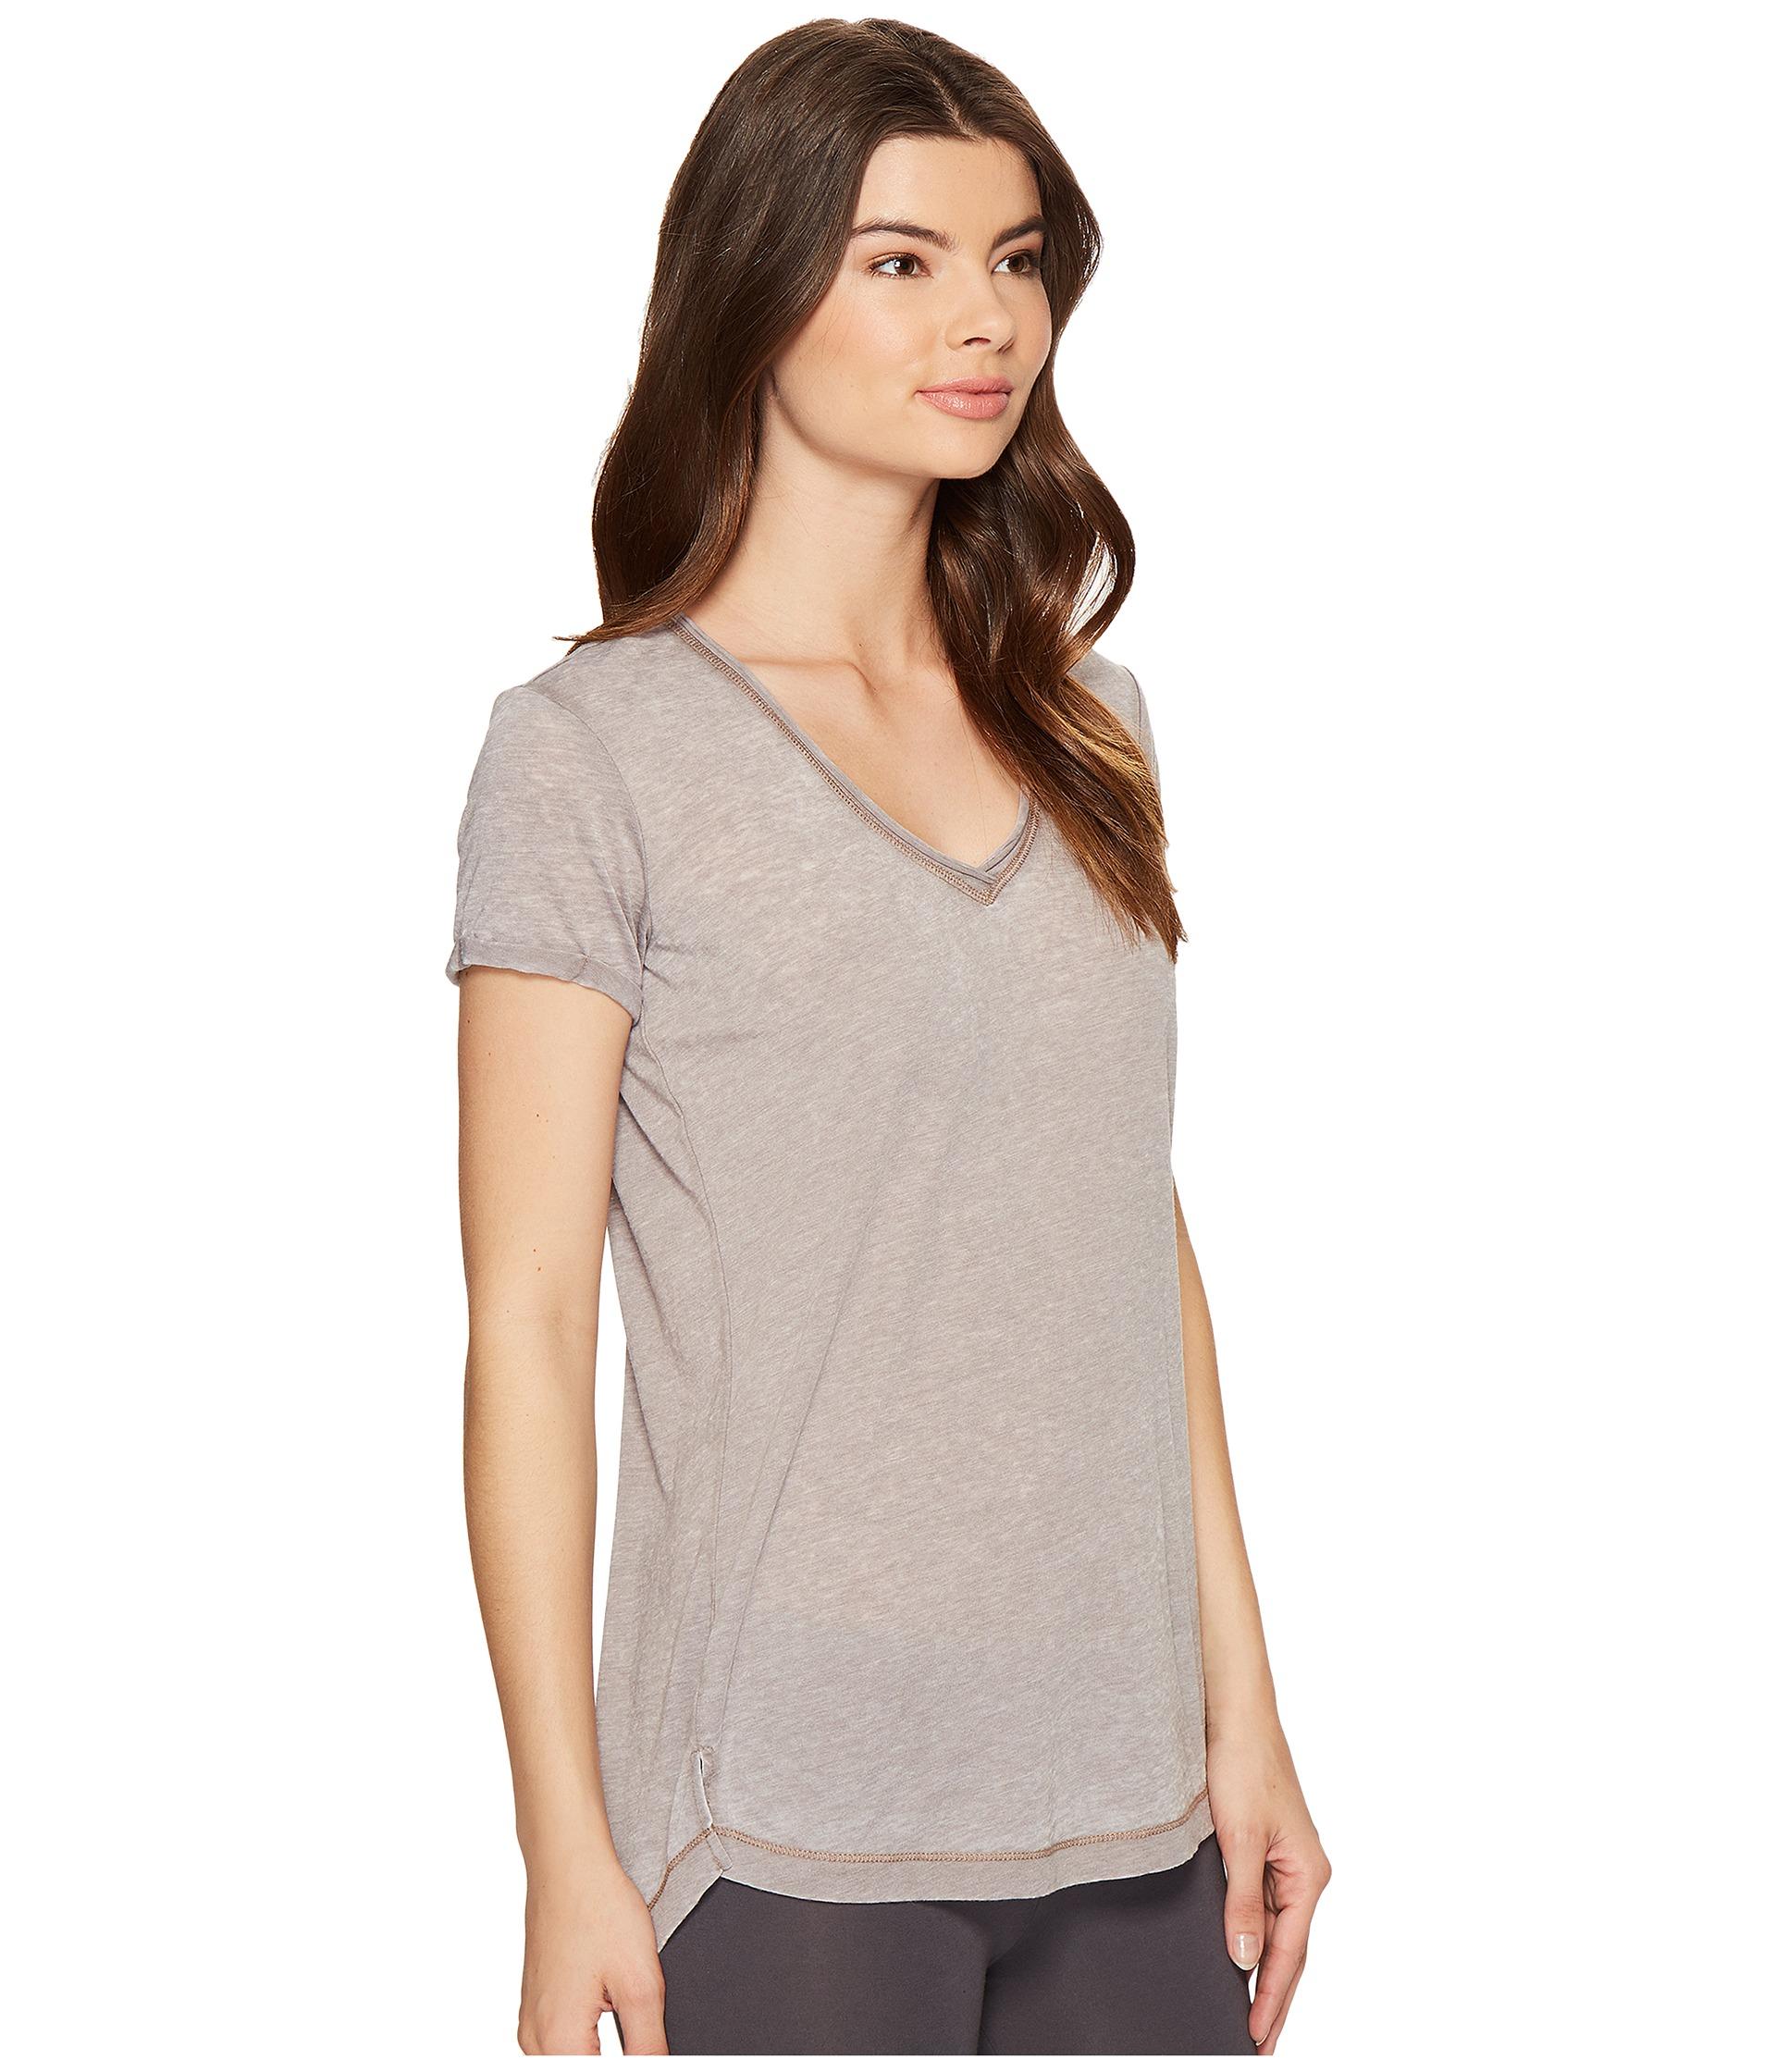 Lyst - Pj Salvage Burnout T-shirt in Gray